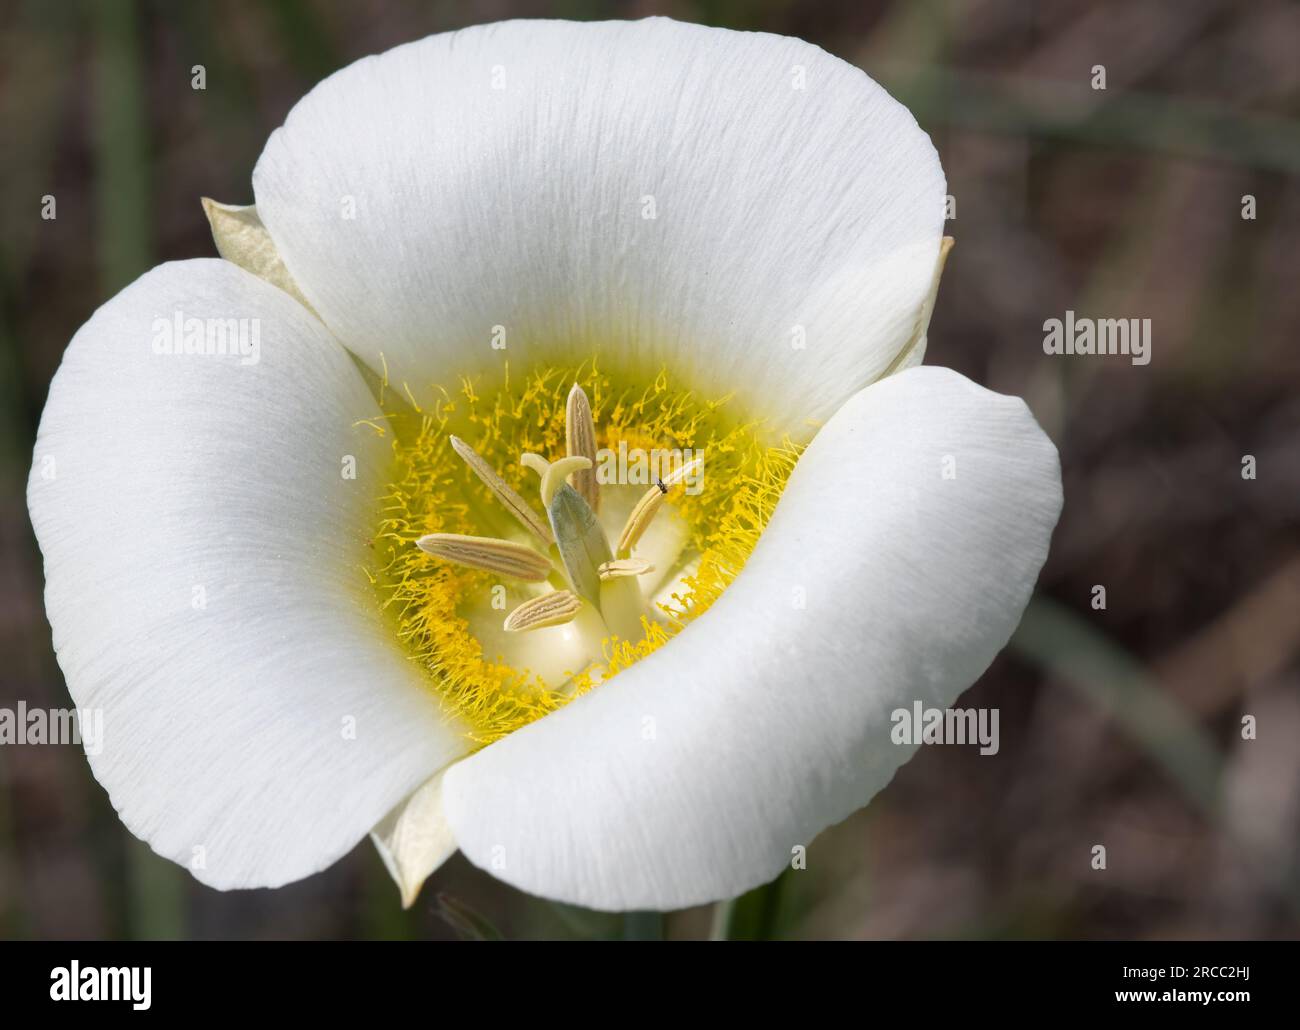 A close up of a single Gunnison Mariposa Lily wildflower Stock Photo